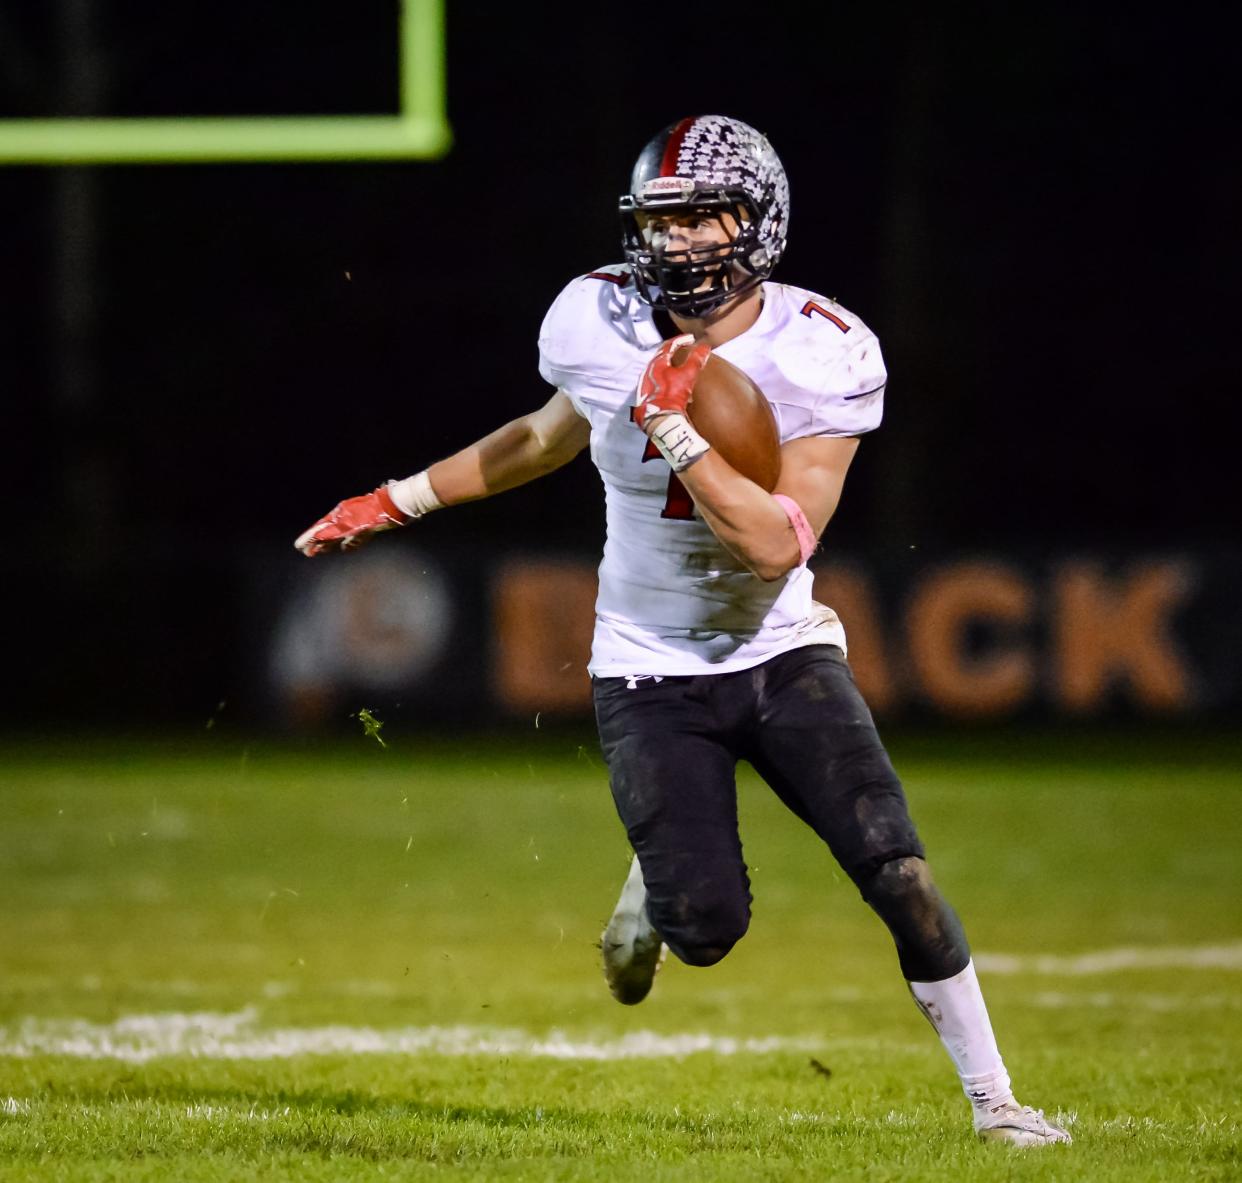 Pewaukee running back Max Sheridan and his teammates will take on Monroe in a Division 3 semifinal.